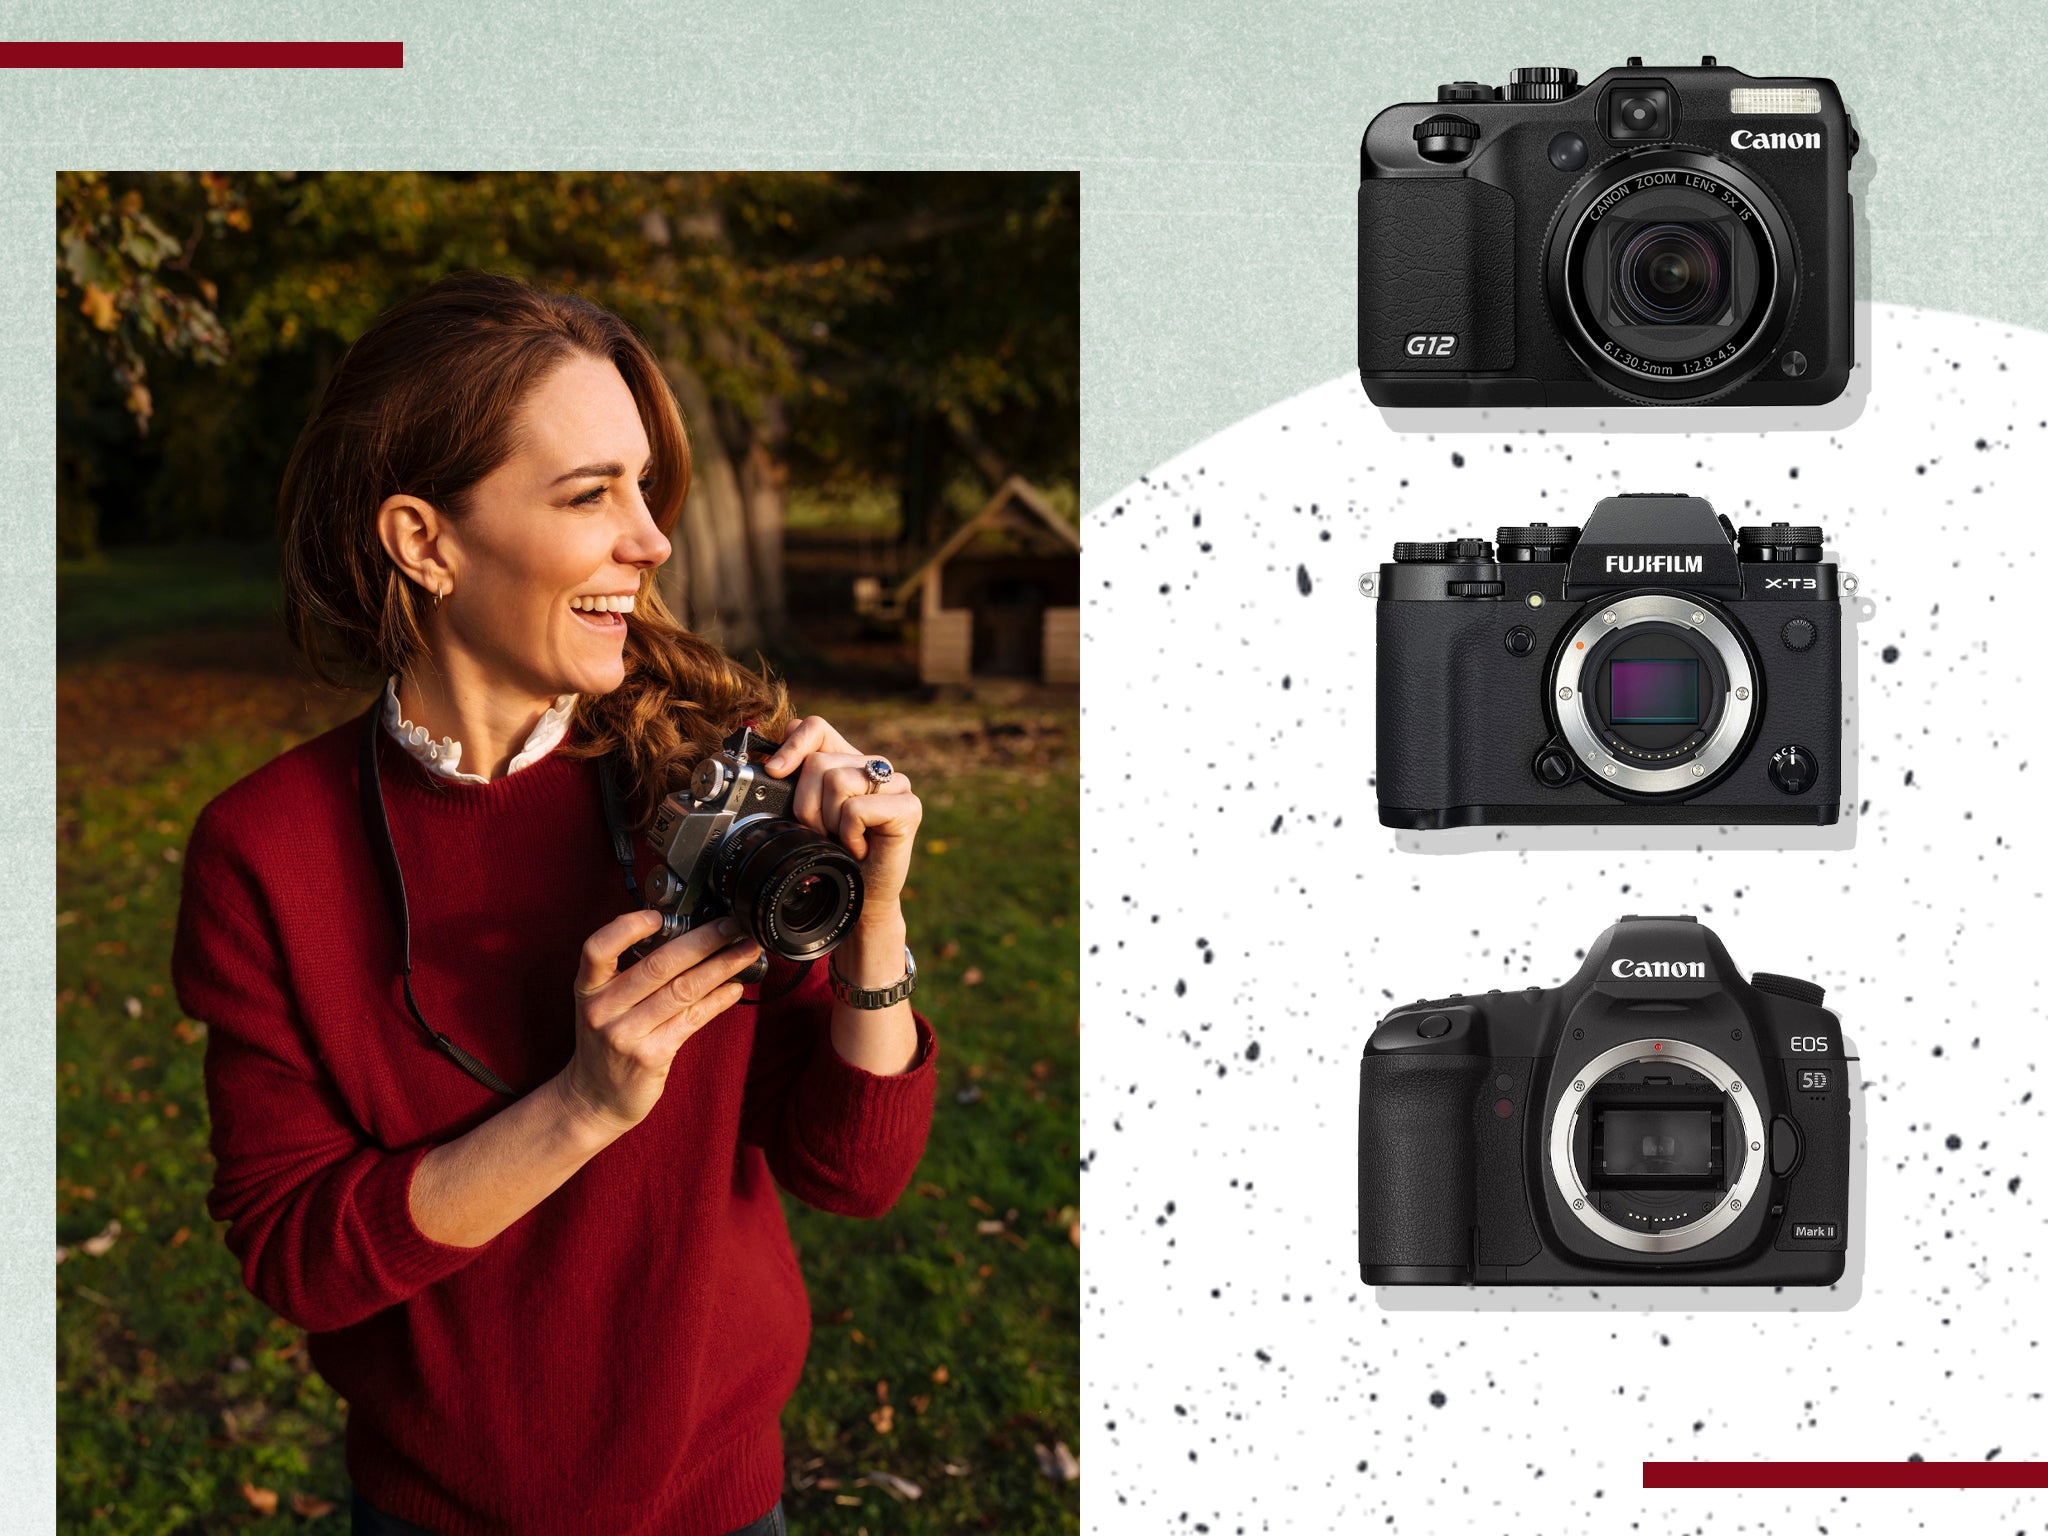 Kate takes pictures with cameras made by these trusted brands